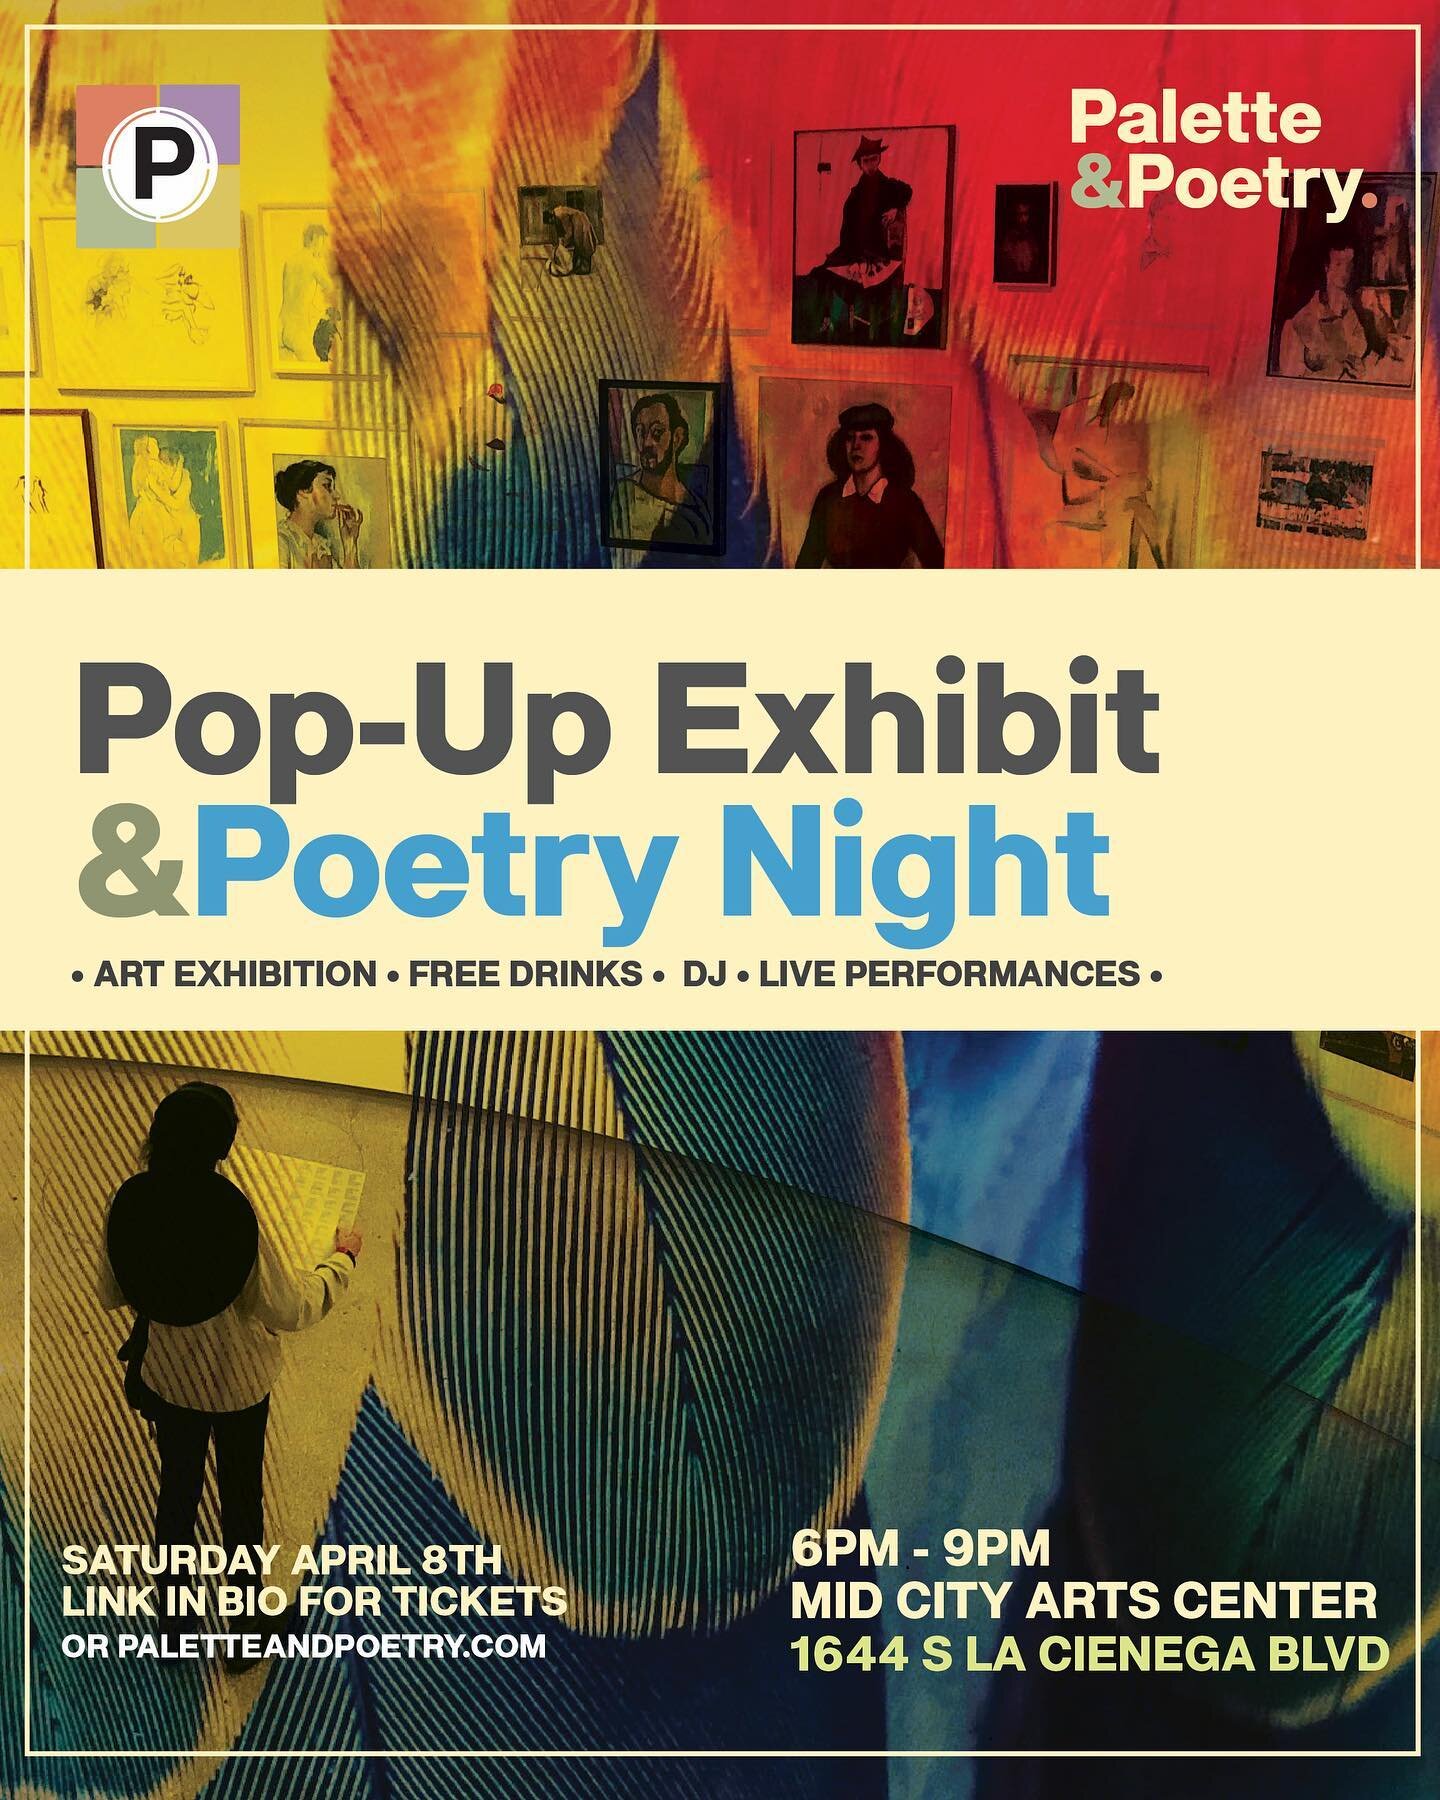 I know you&rsquo;re all just sitting wondering &ldquo;What the heck do I do on Easter Eve? 🤔&rdquo;&hellip;well I gotcha covered! Come check out #paletteandpoetry &lsquo;s pop up Exhibit! I&rsquo;ll be showing 4 New Pieces!!! 

#hopetoseeyouthere #p